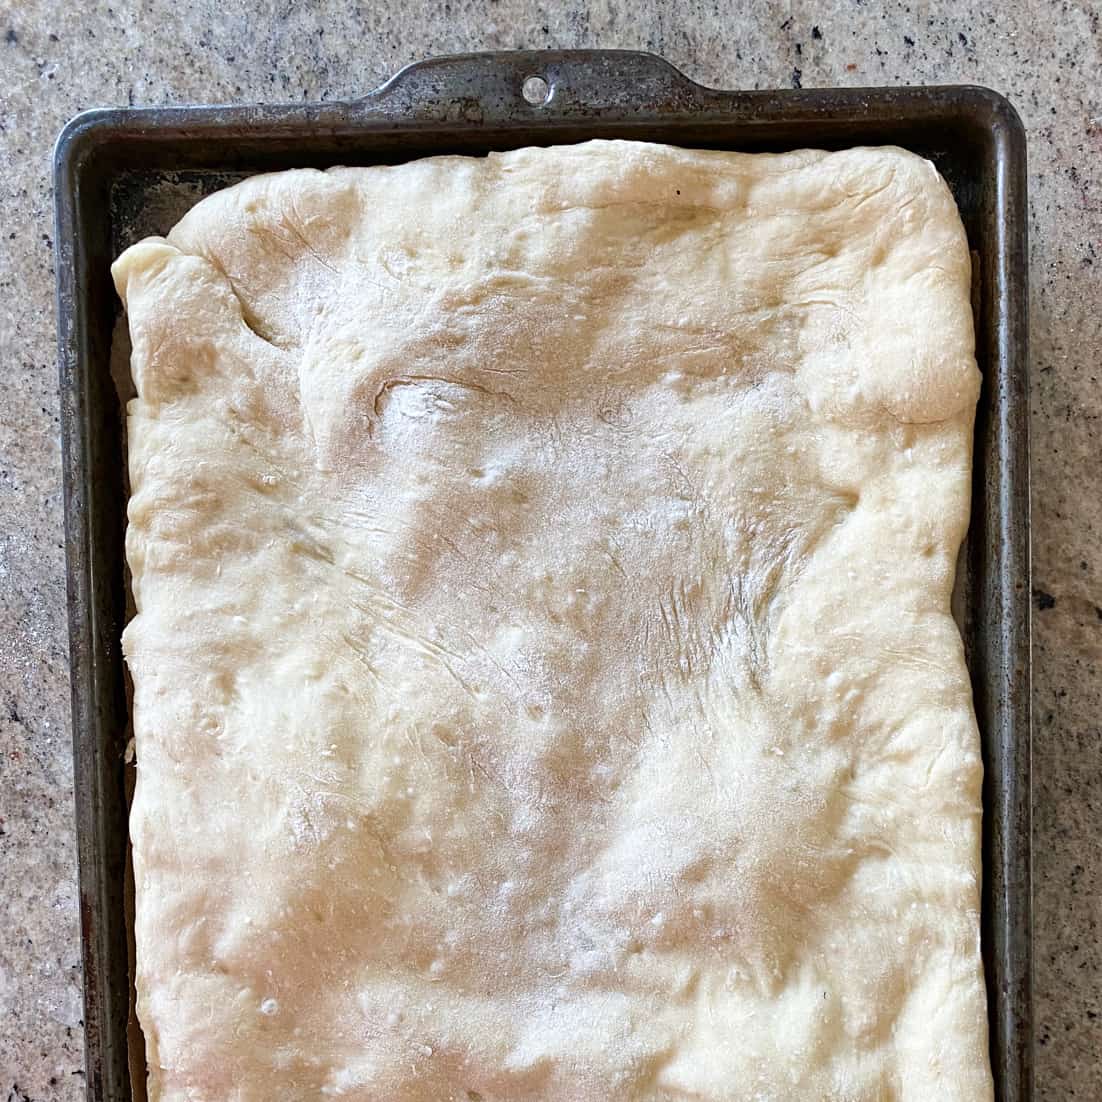 How To Par Bake Pizza Dough To Freeze Or Bake Later - Sip Bite Go